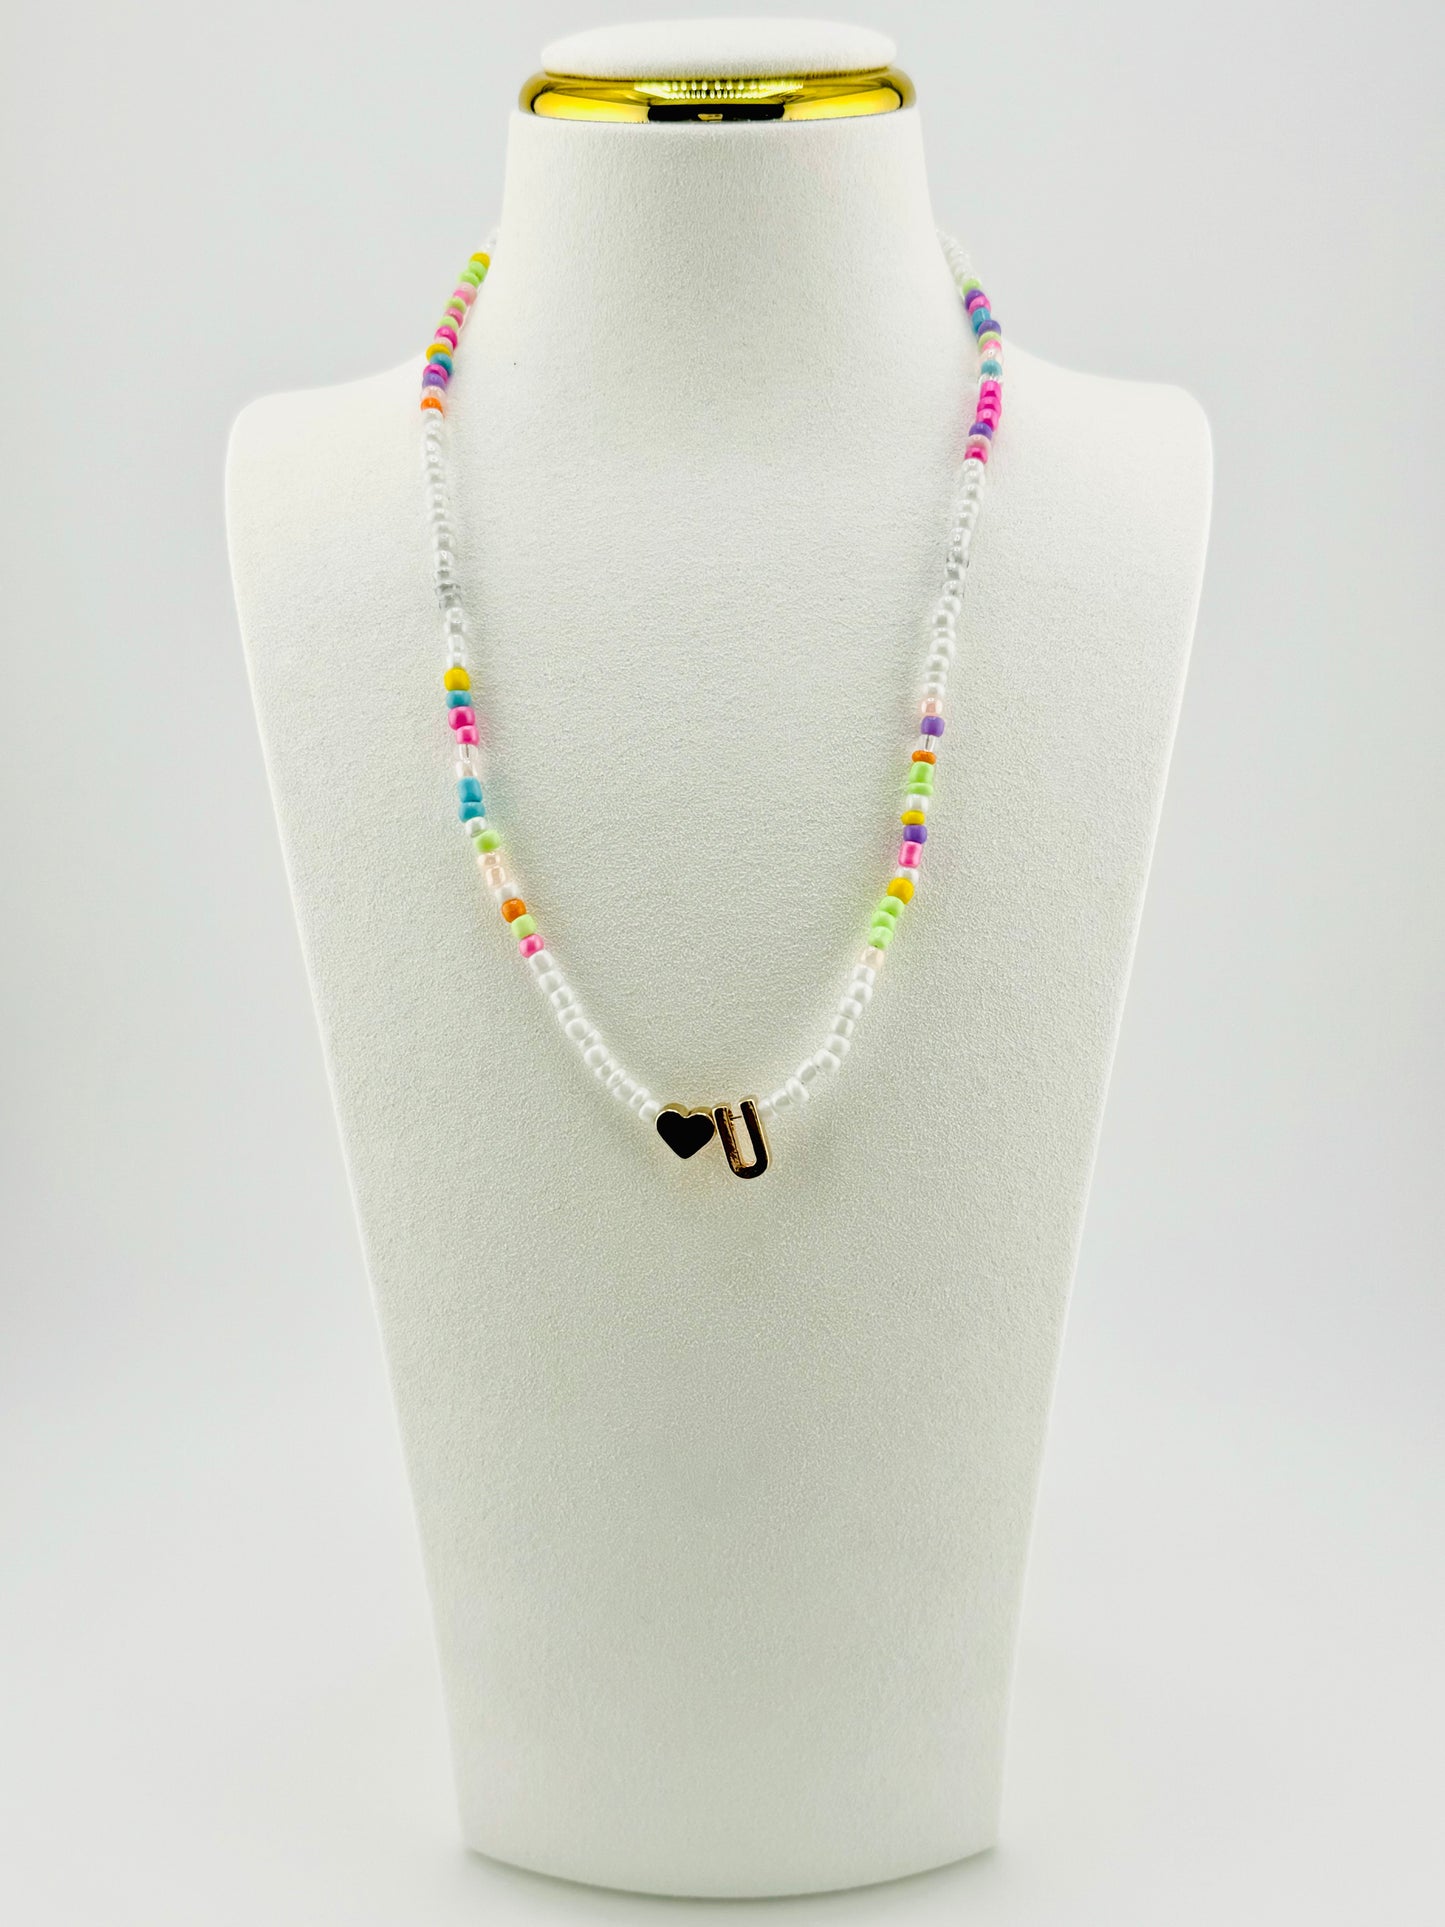 U beaded Initial necklace in white and pastel colors